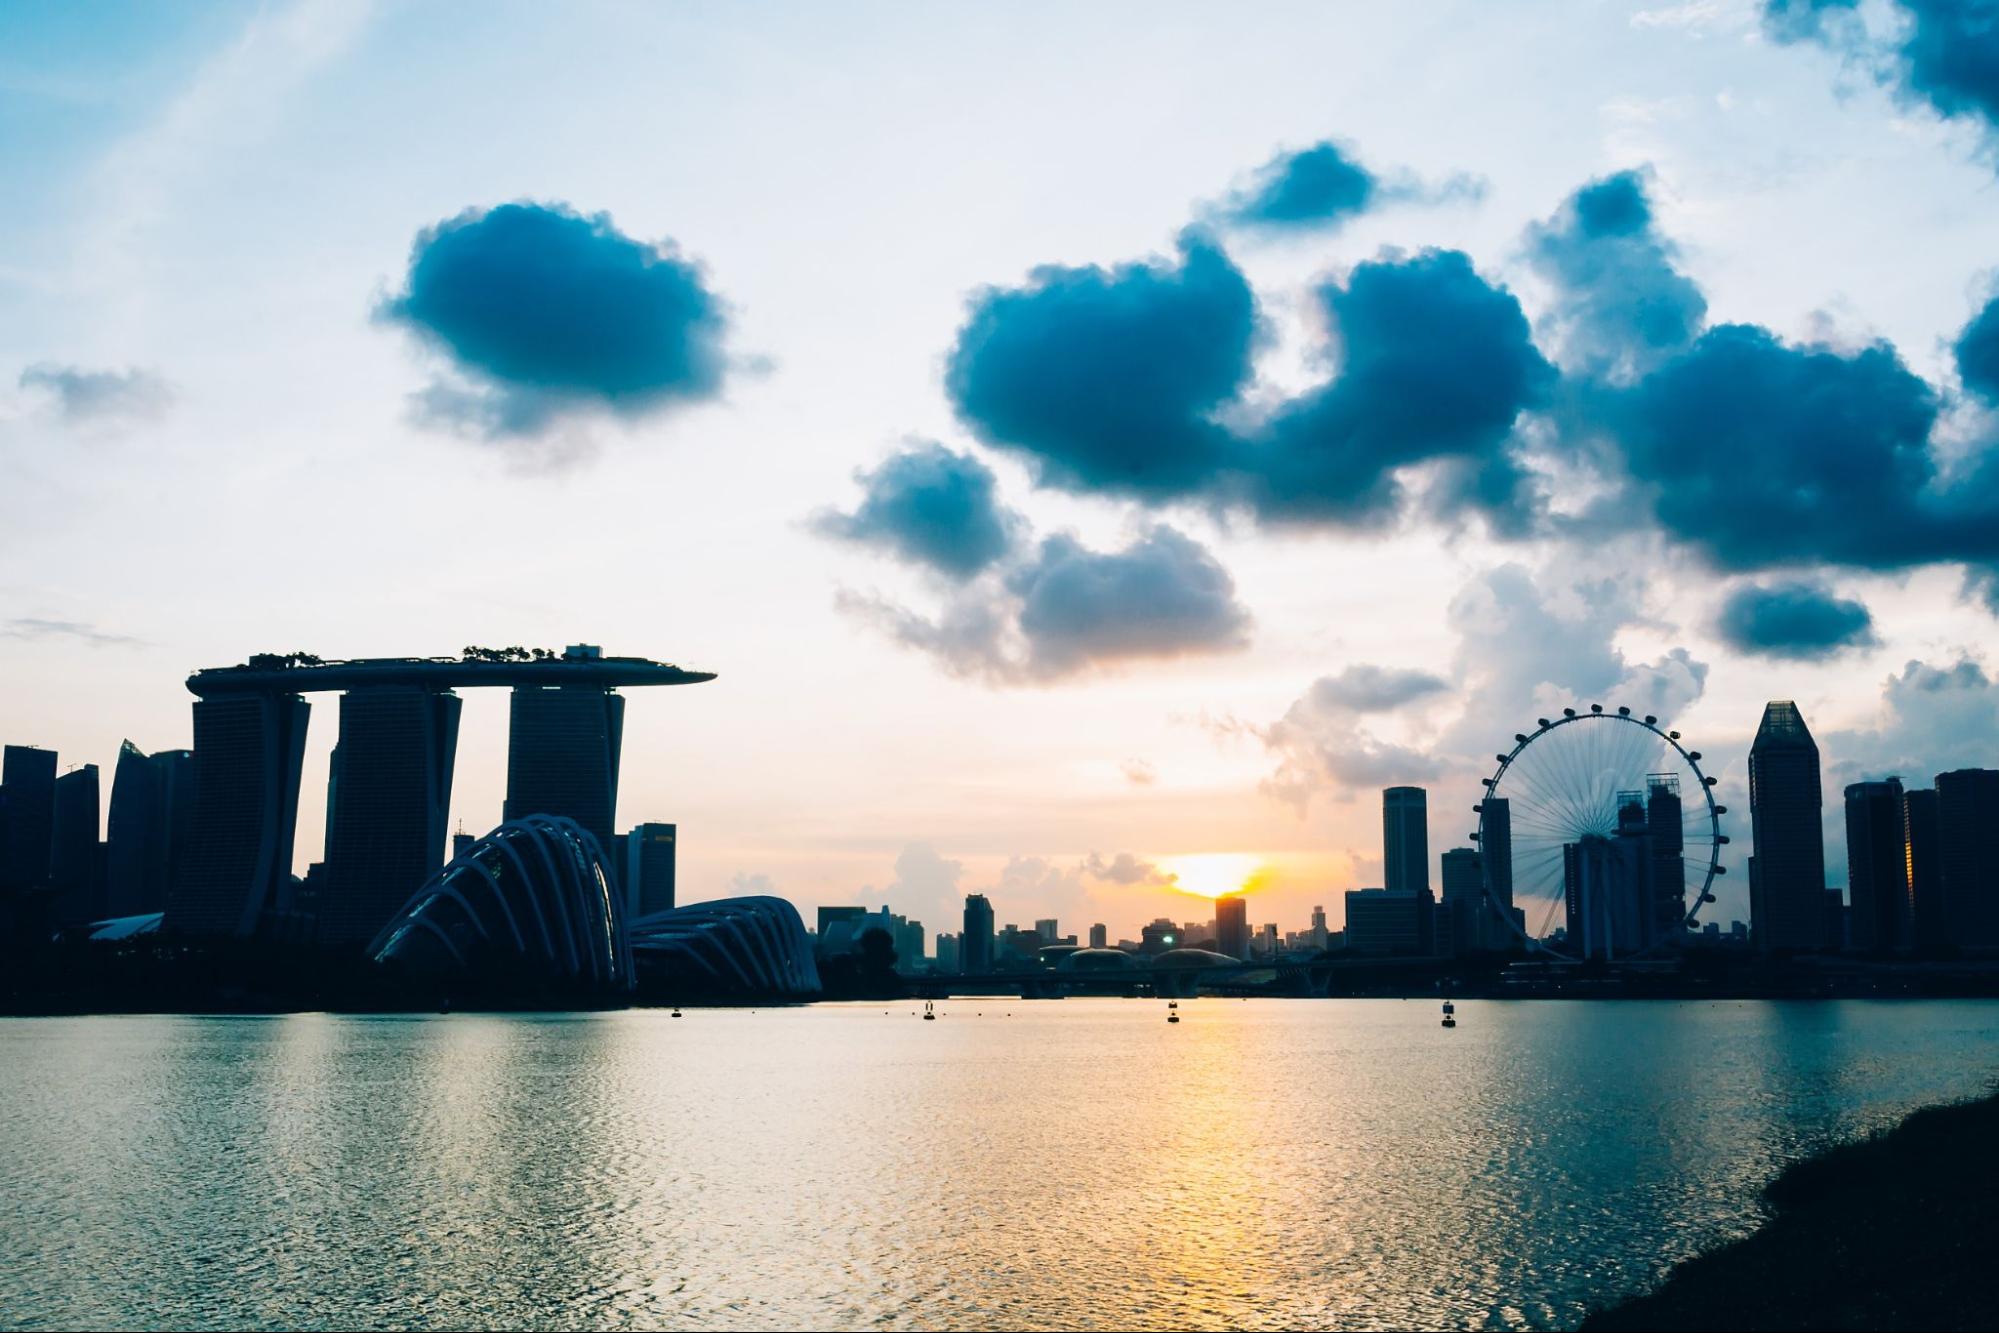 Landscape of the Singapore with beautiful sky